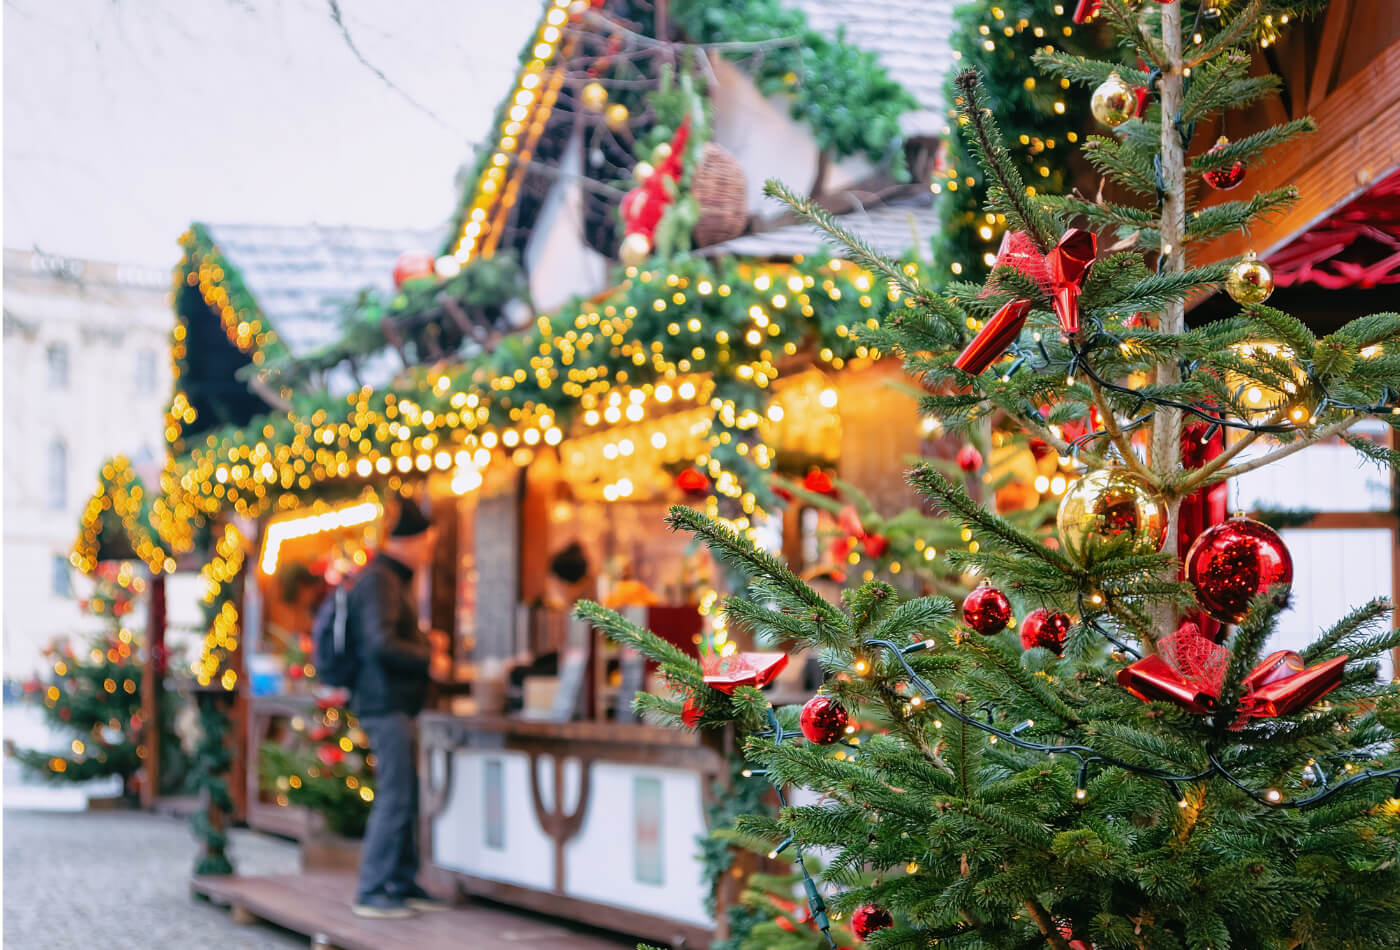 A Christmas market in Cornwall with a Christmas tree in the foreground.